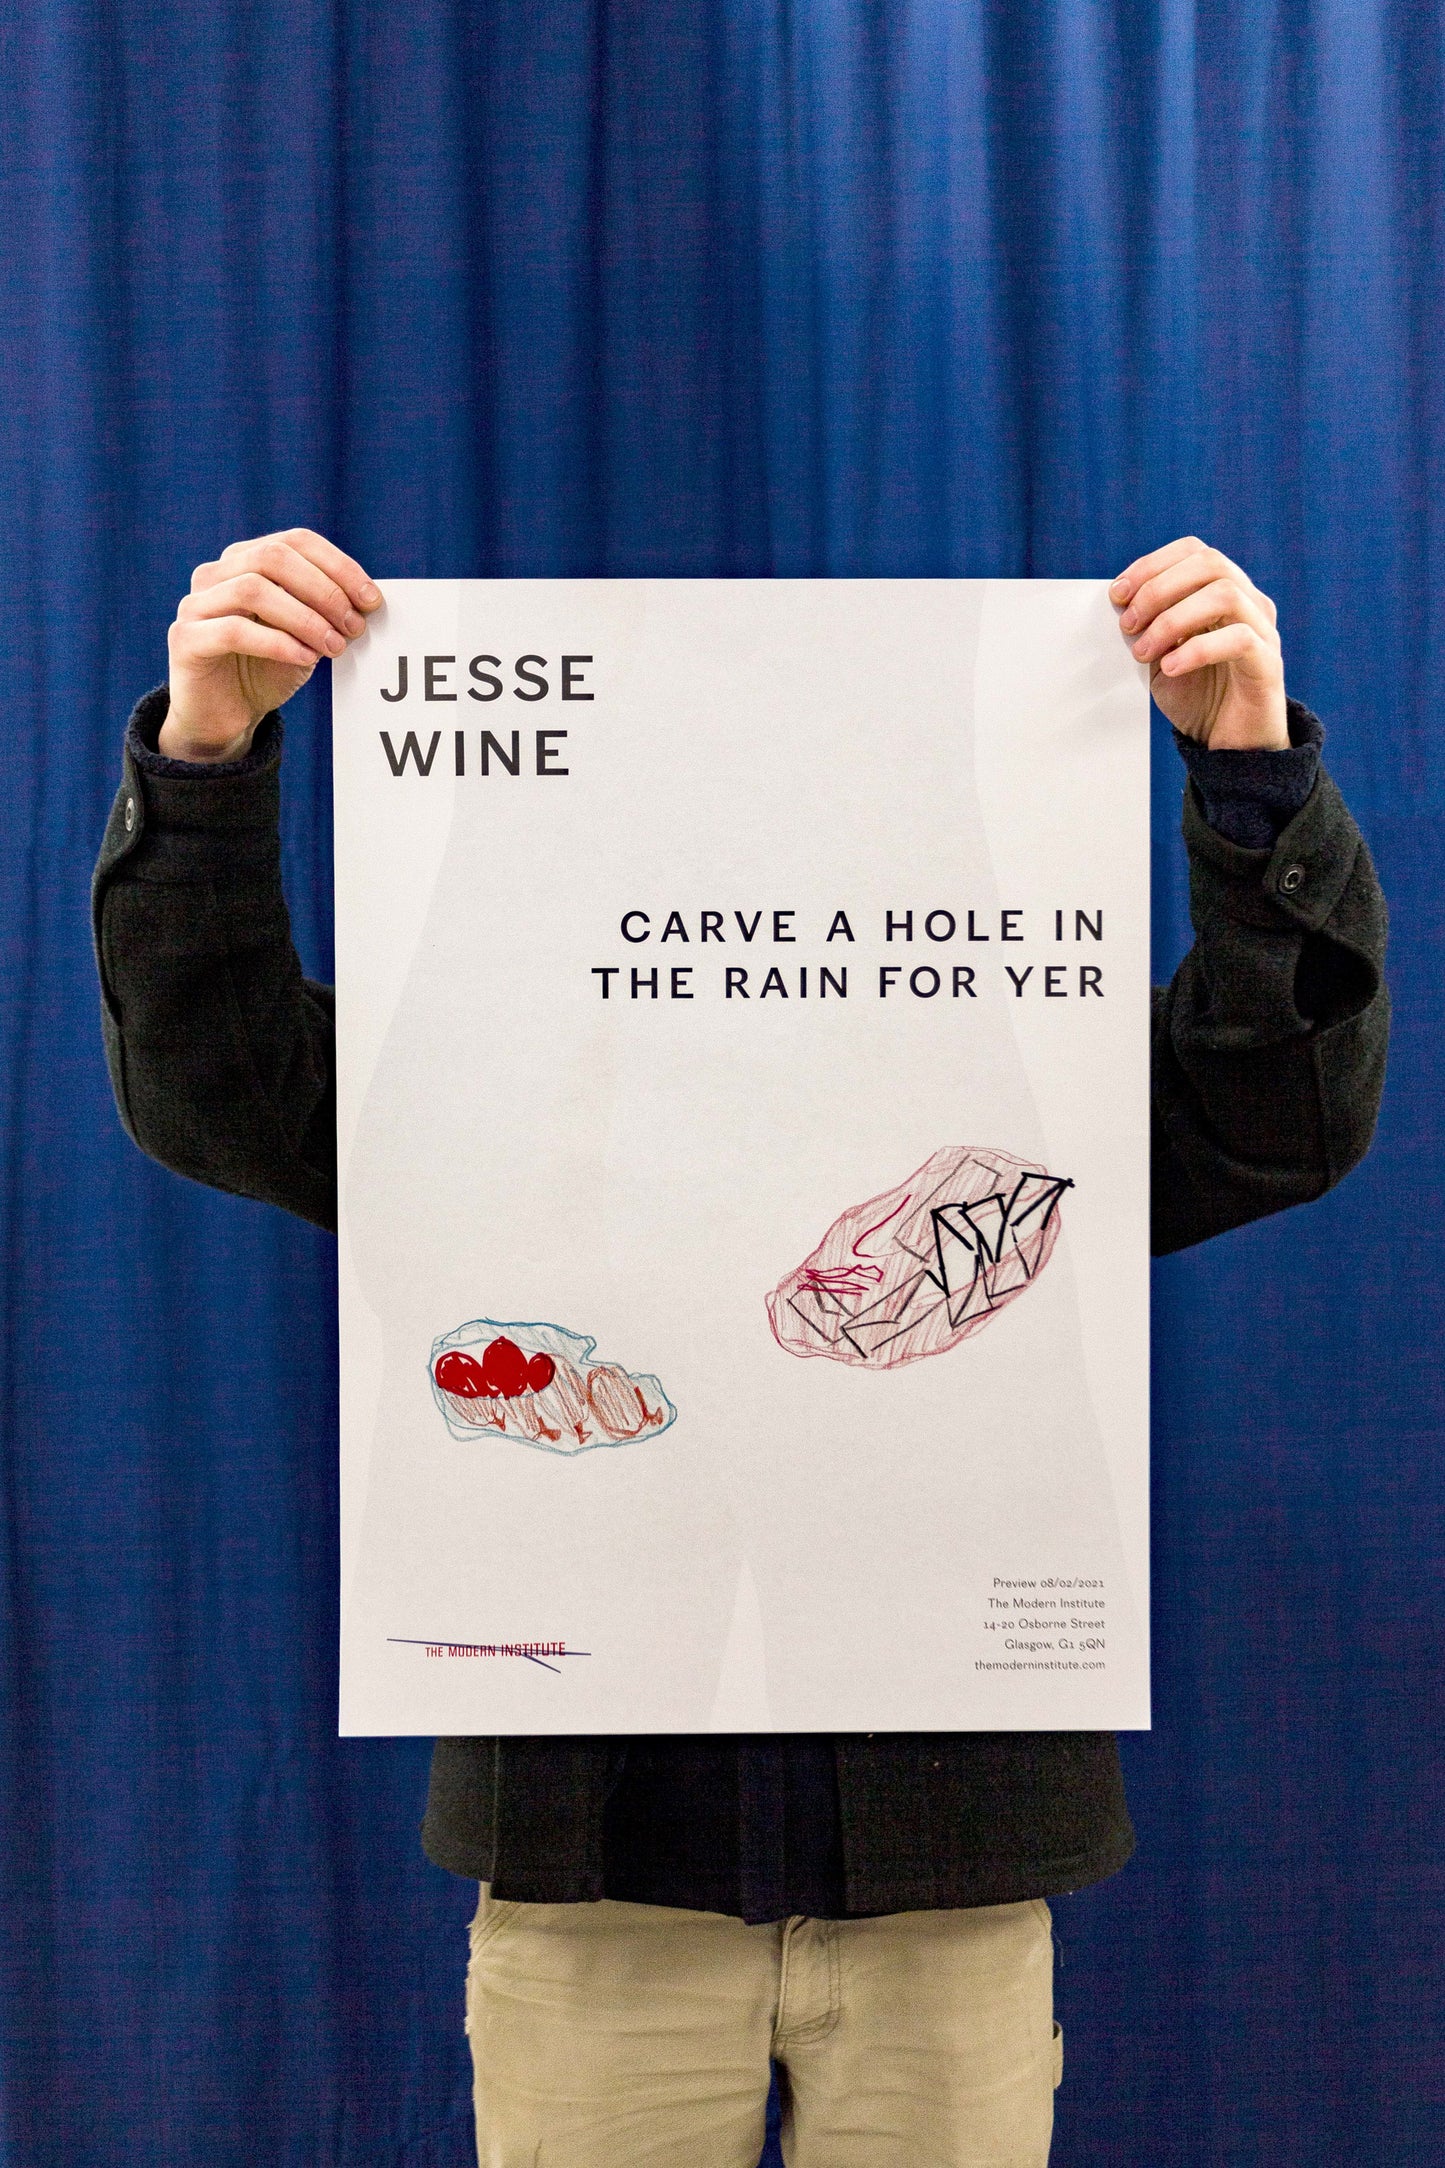 Jesse Wine - Carve a Hole in the Rain for Yer